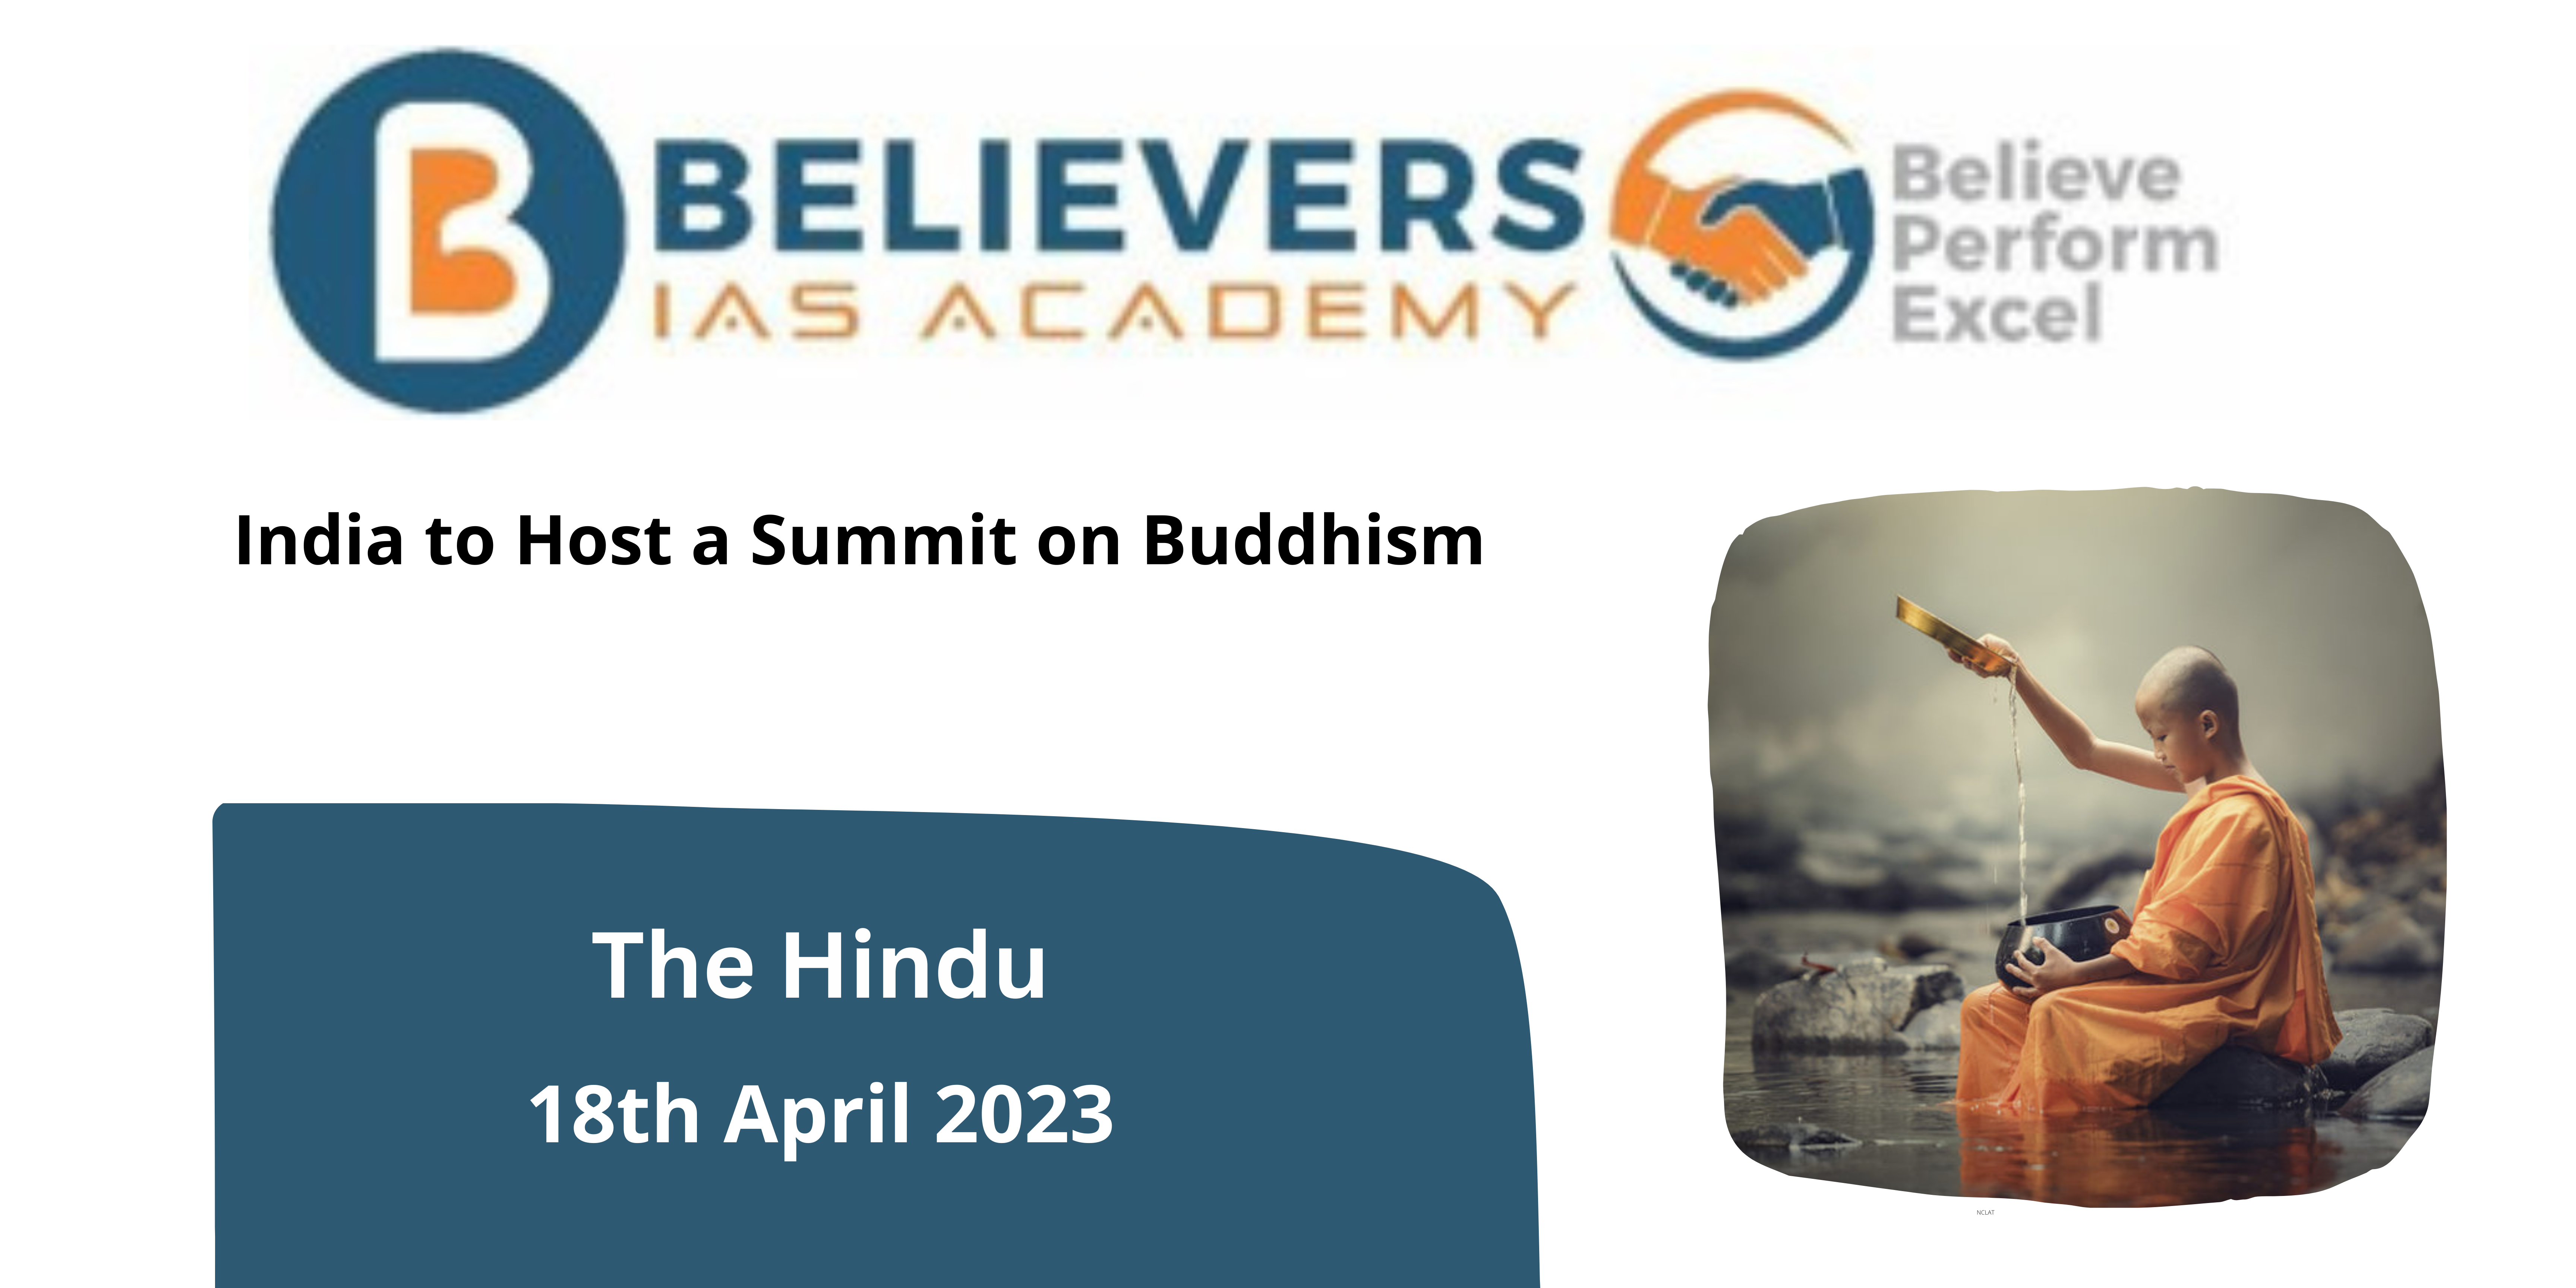 India to Host a Summit on Buddhism